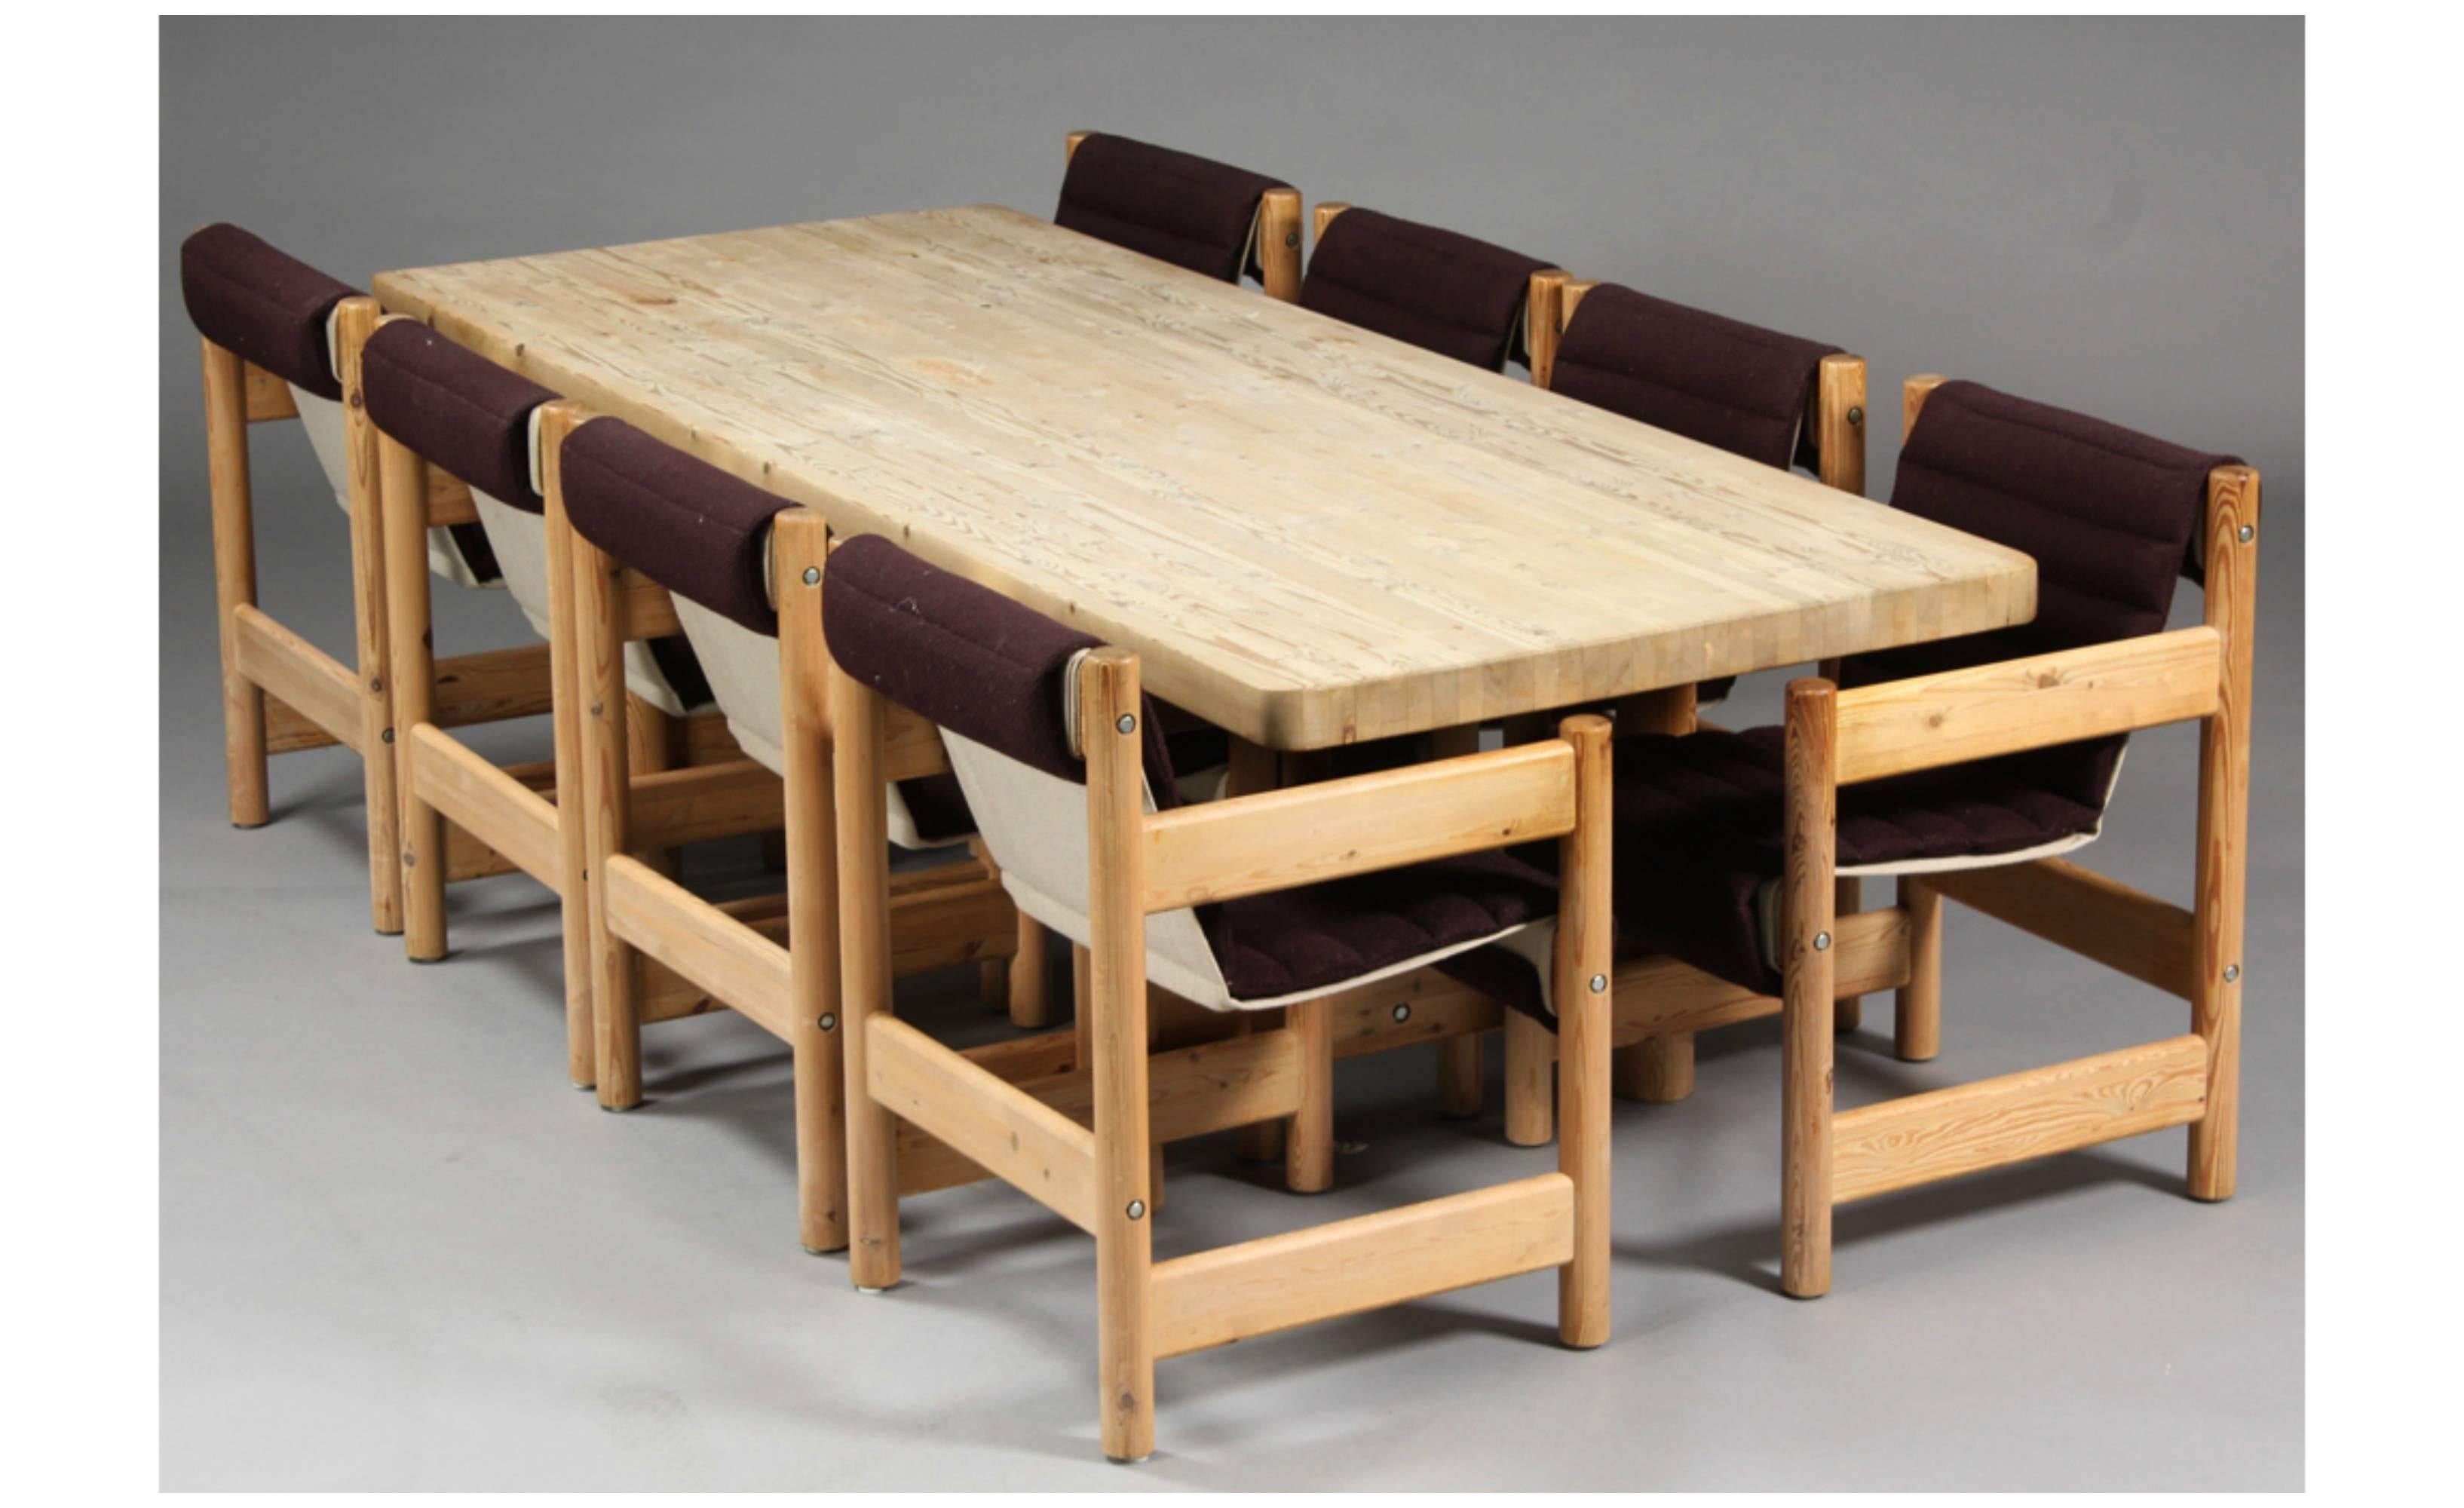 Great 1960s, Scandinavian pine dining room set consisting of a table with eight chairs in the style of Børge Mogensen Asserdal series for Karl Andersson and Son, Sweden. Great proportions solid and sturdy yet very elegant. The color and the texture